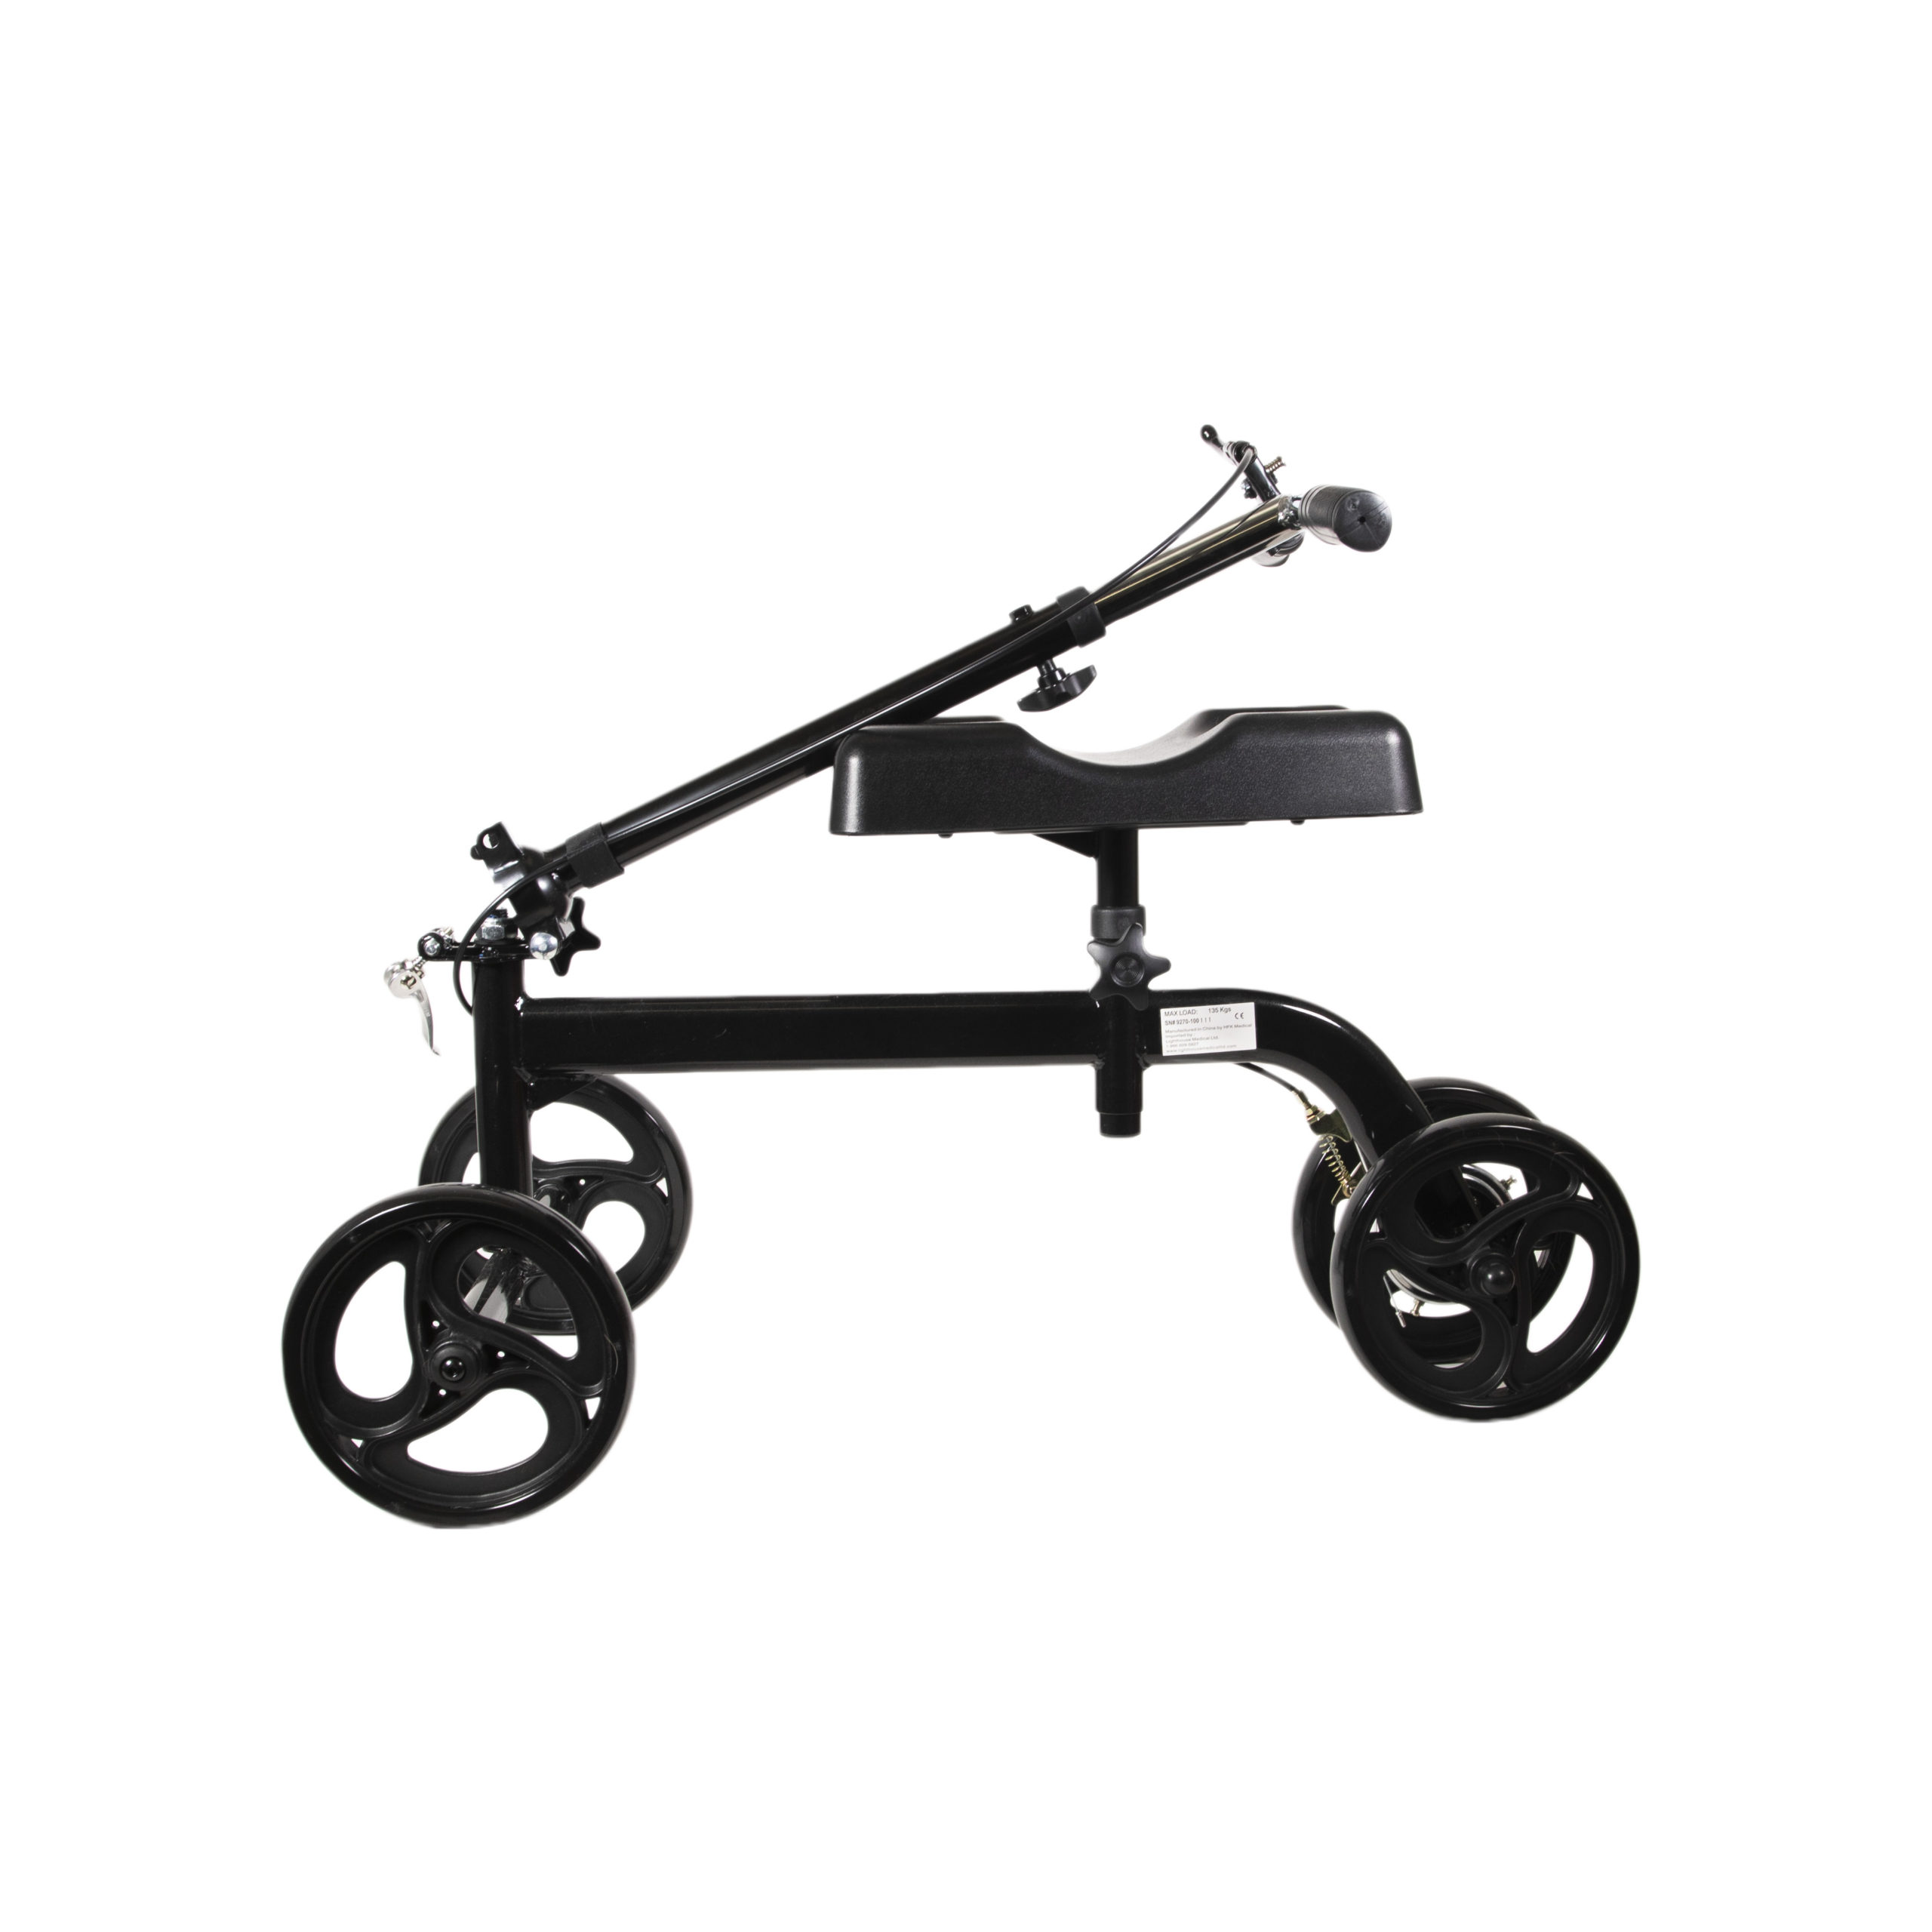 Excursion knee walker folded, side view, glossy black colour